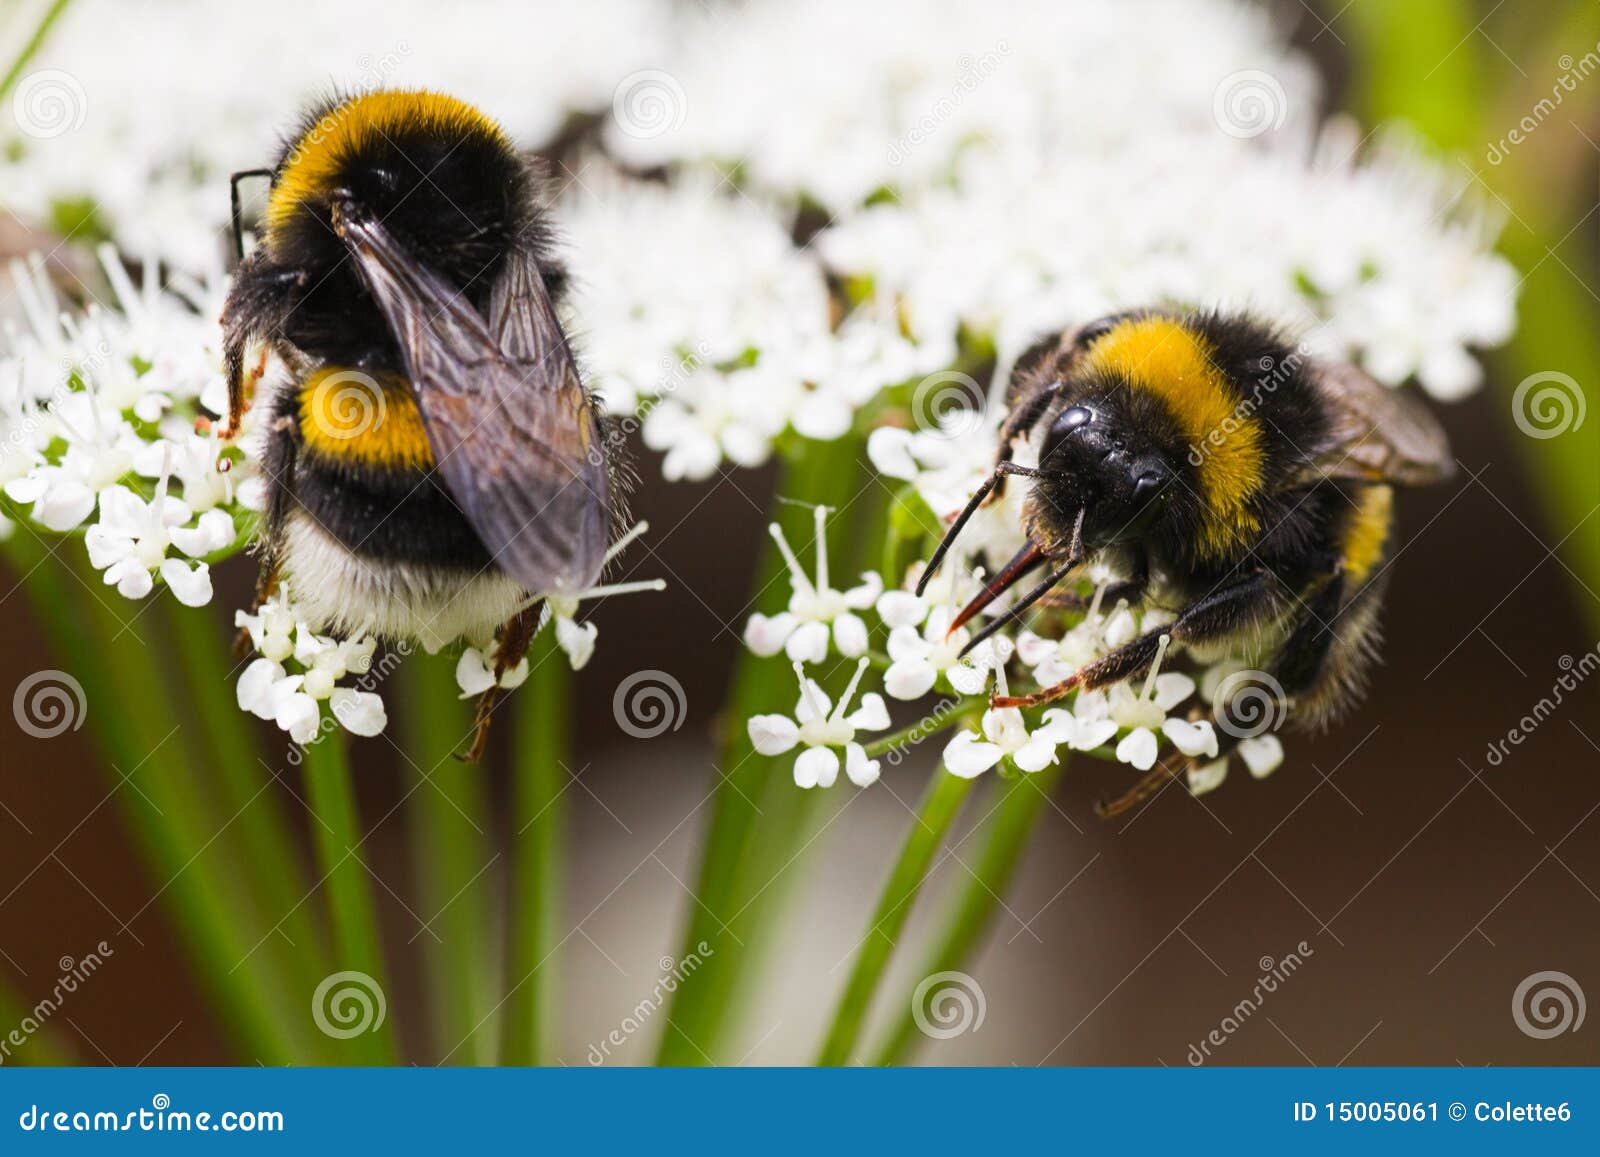 bumble bees busy gathering nectar in summer